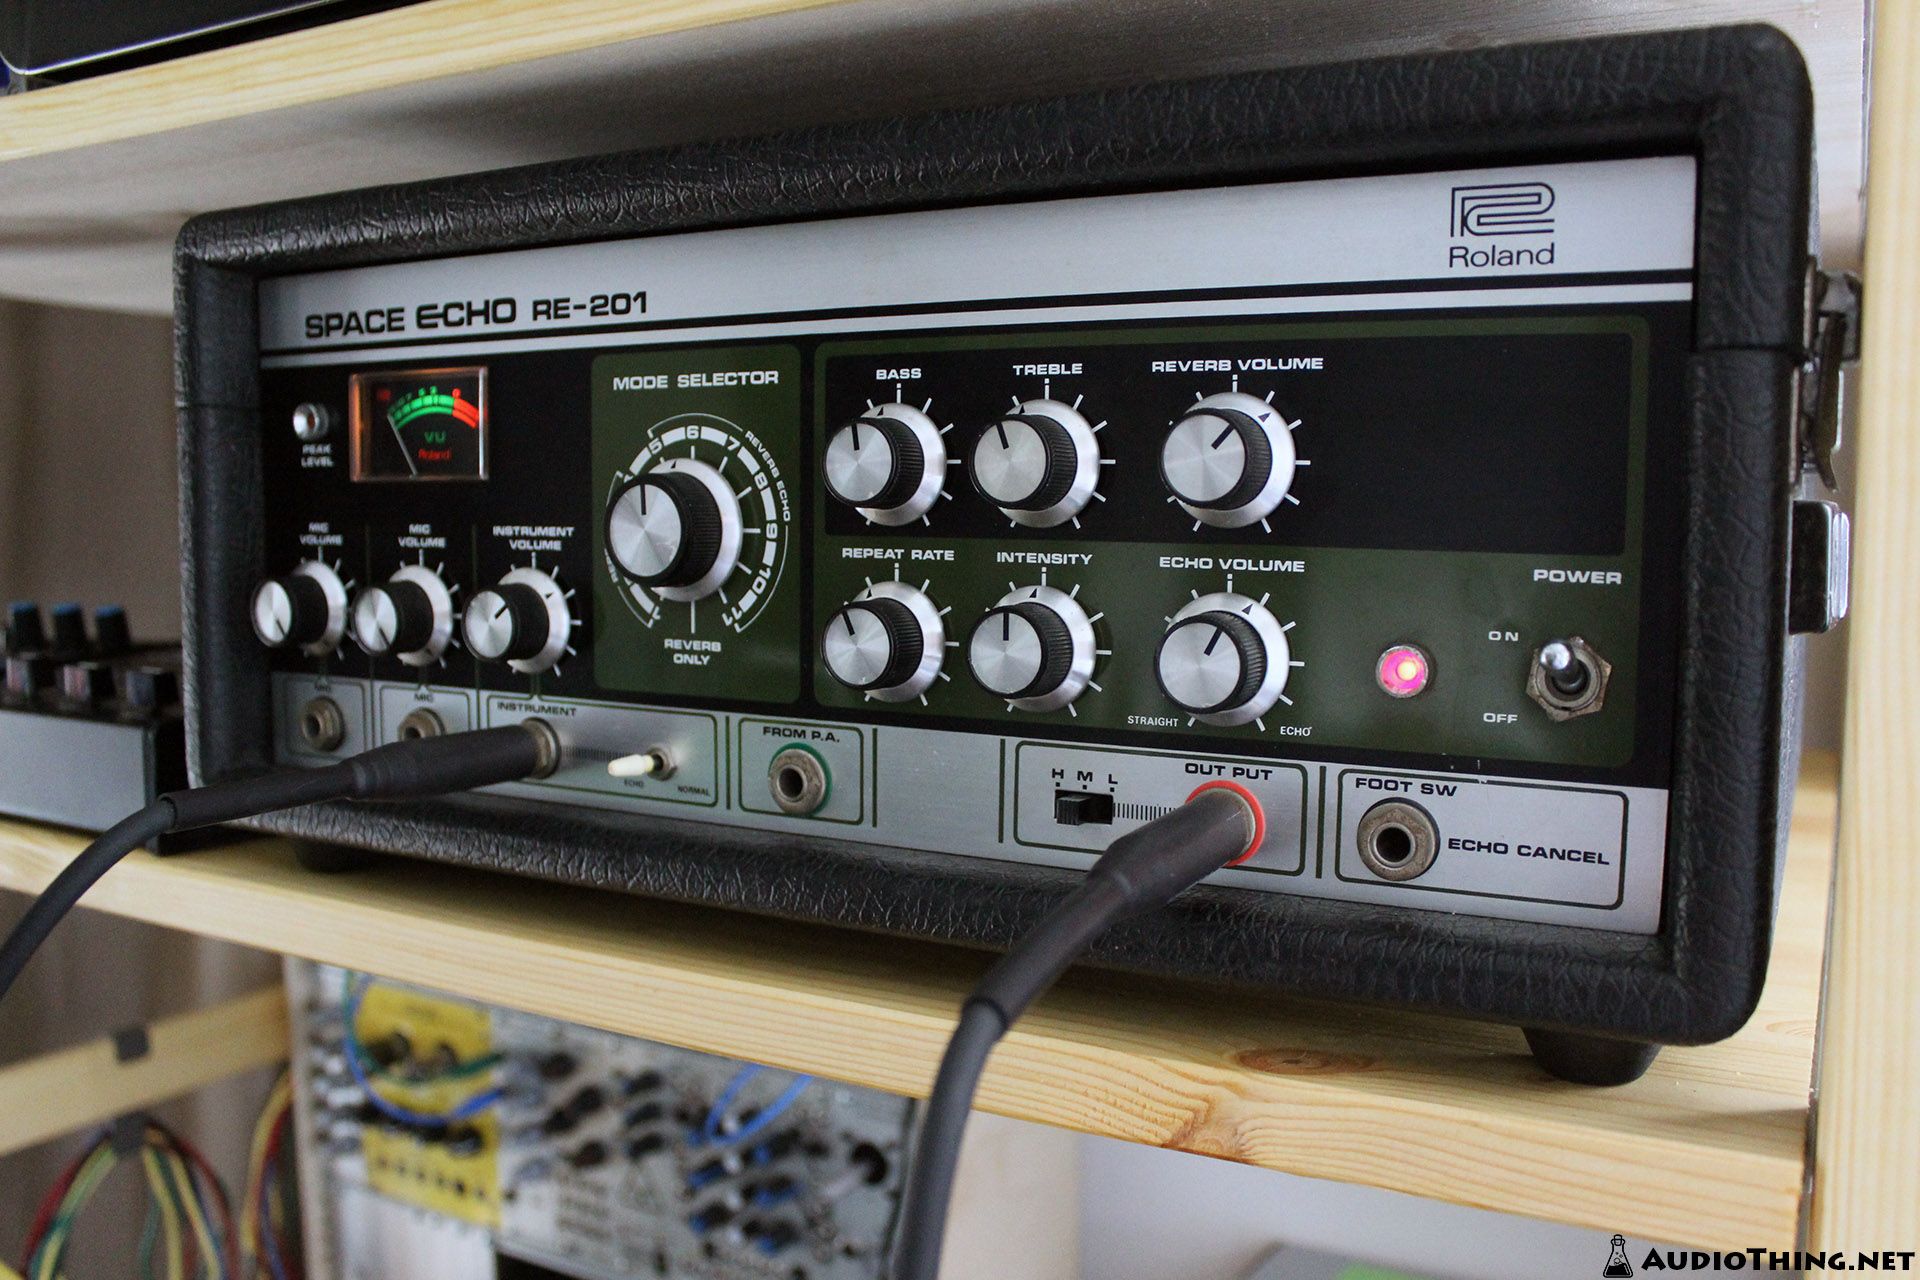 The Roland Space Echo RE-201...The famous Tape Echo effect unit that Outer Space is modelled after